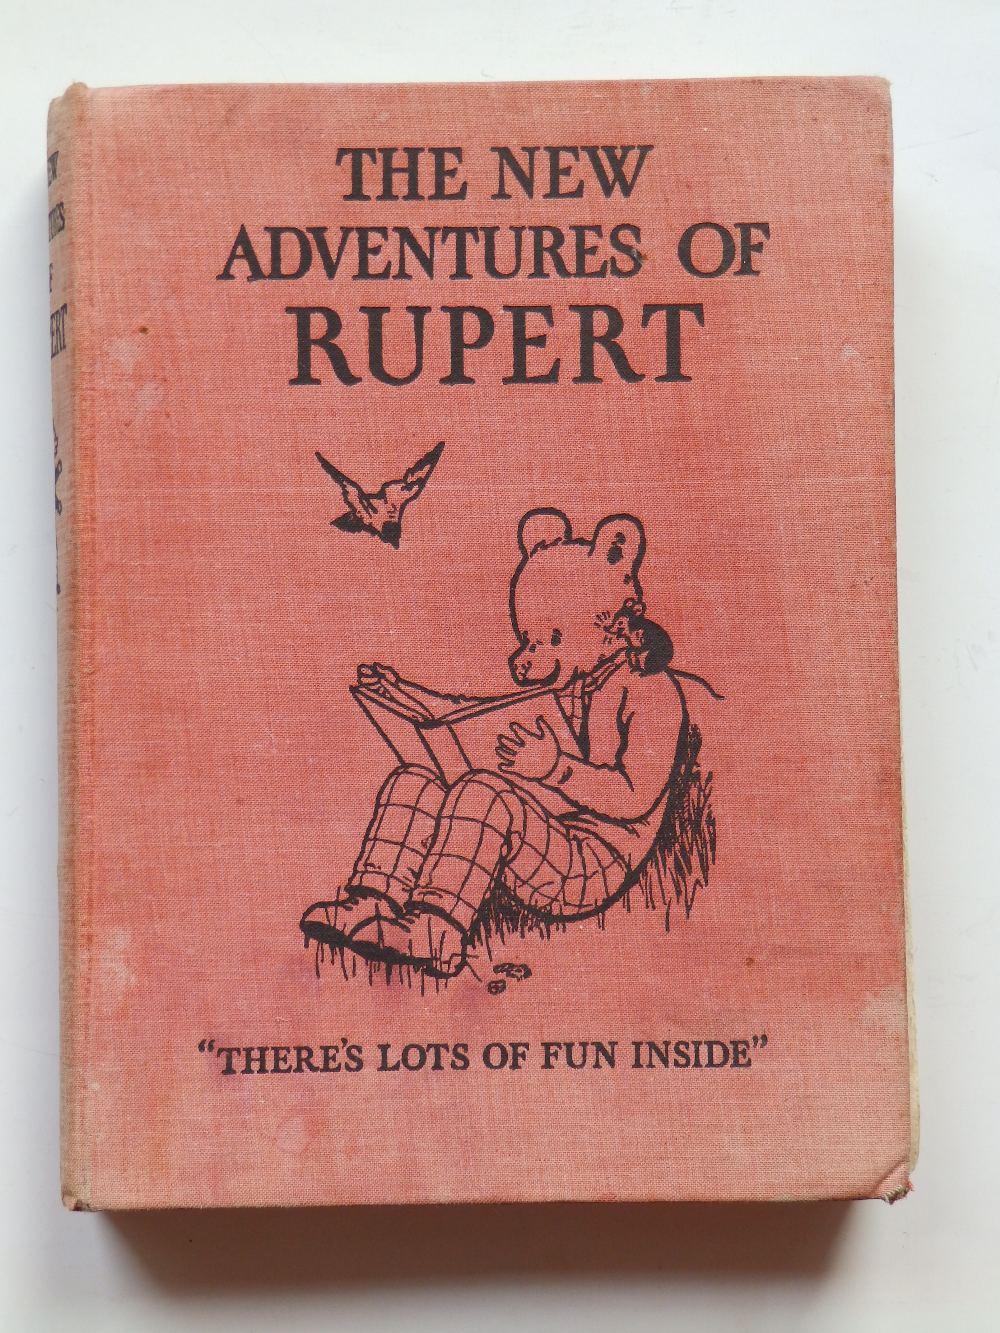 The New Adventures of Rupert – 1936, in red cloth – a/f.